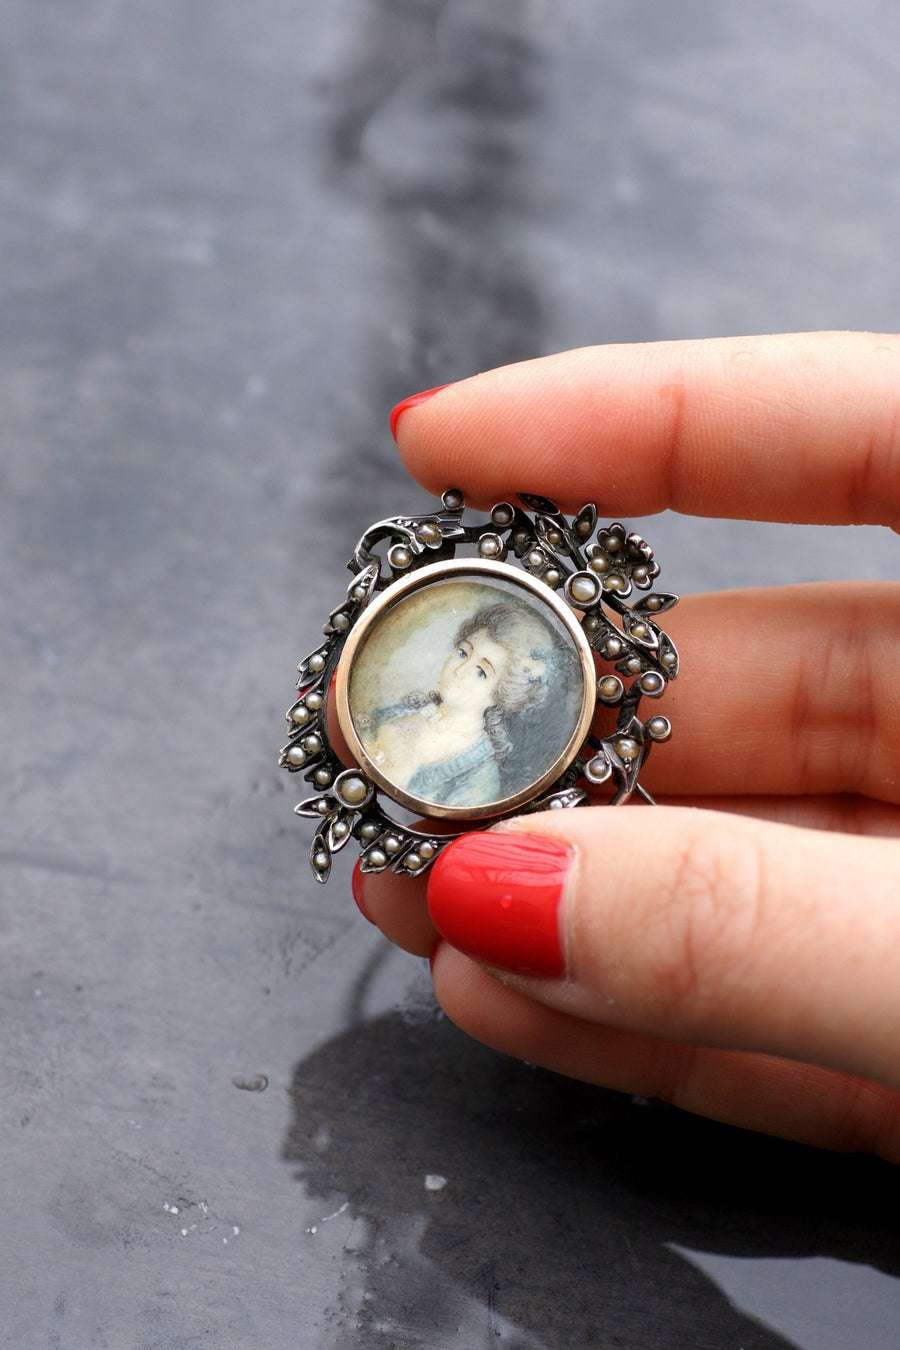 Antique Victorian brooch in gold and silver with miniature - Galerie Pénélope